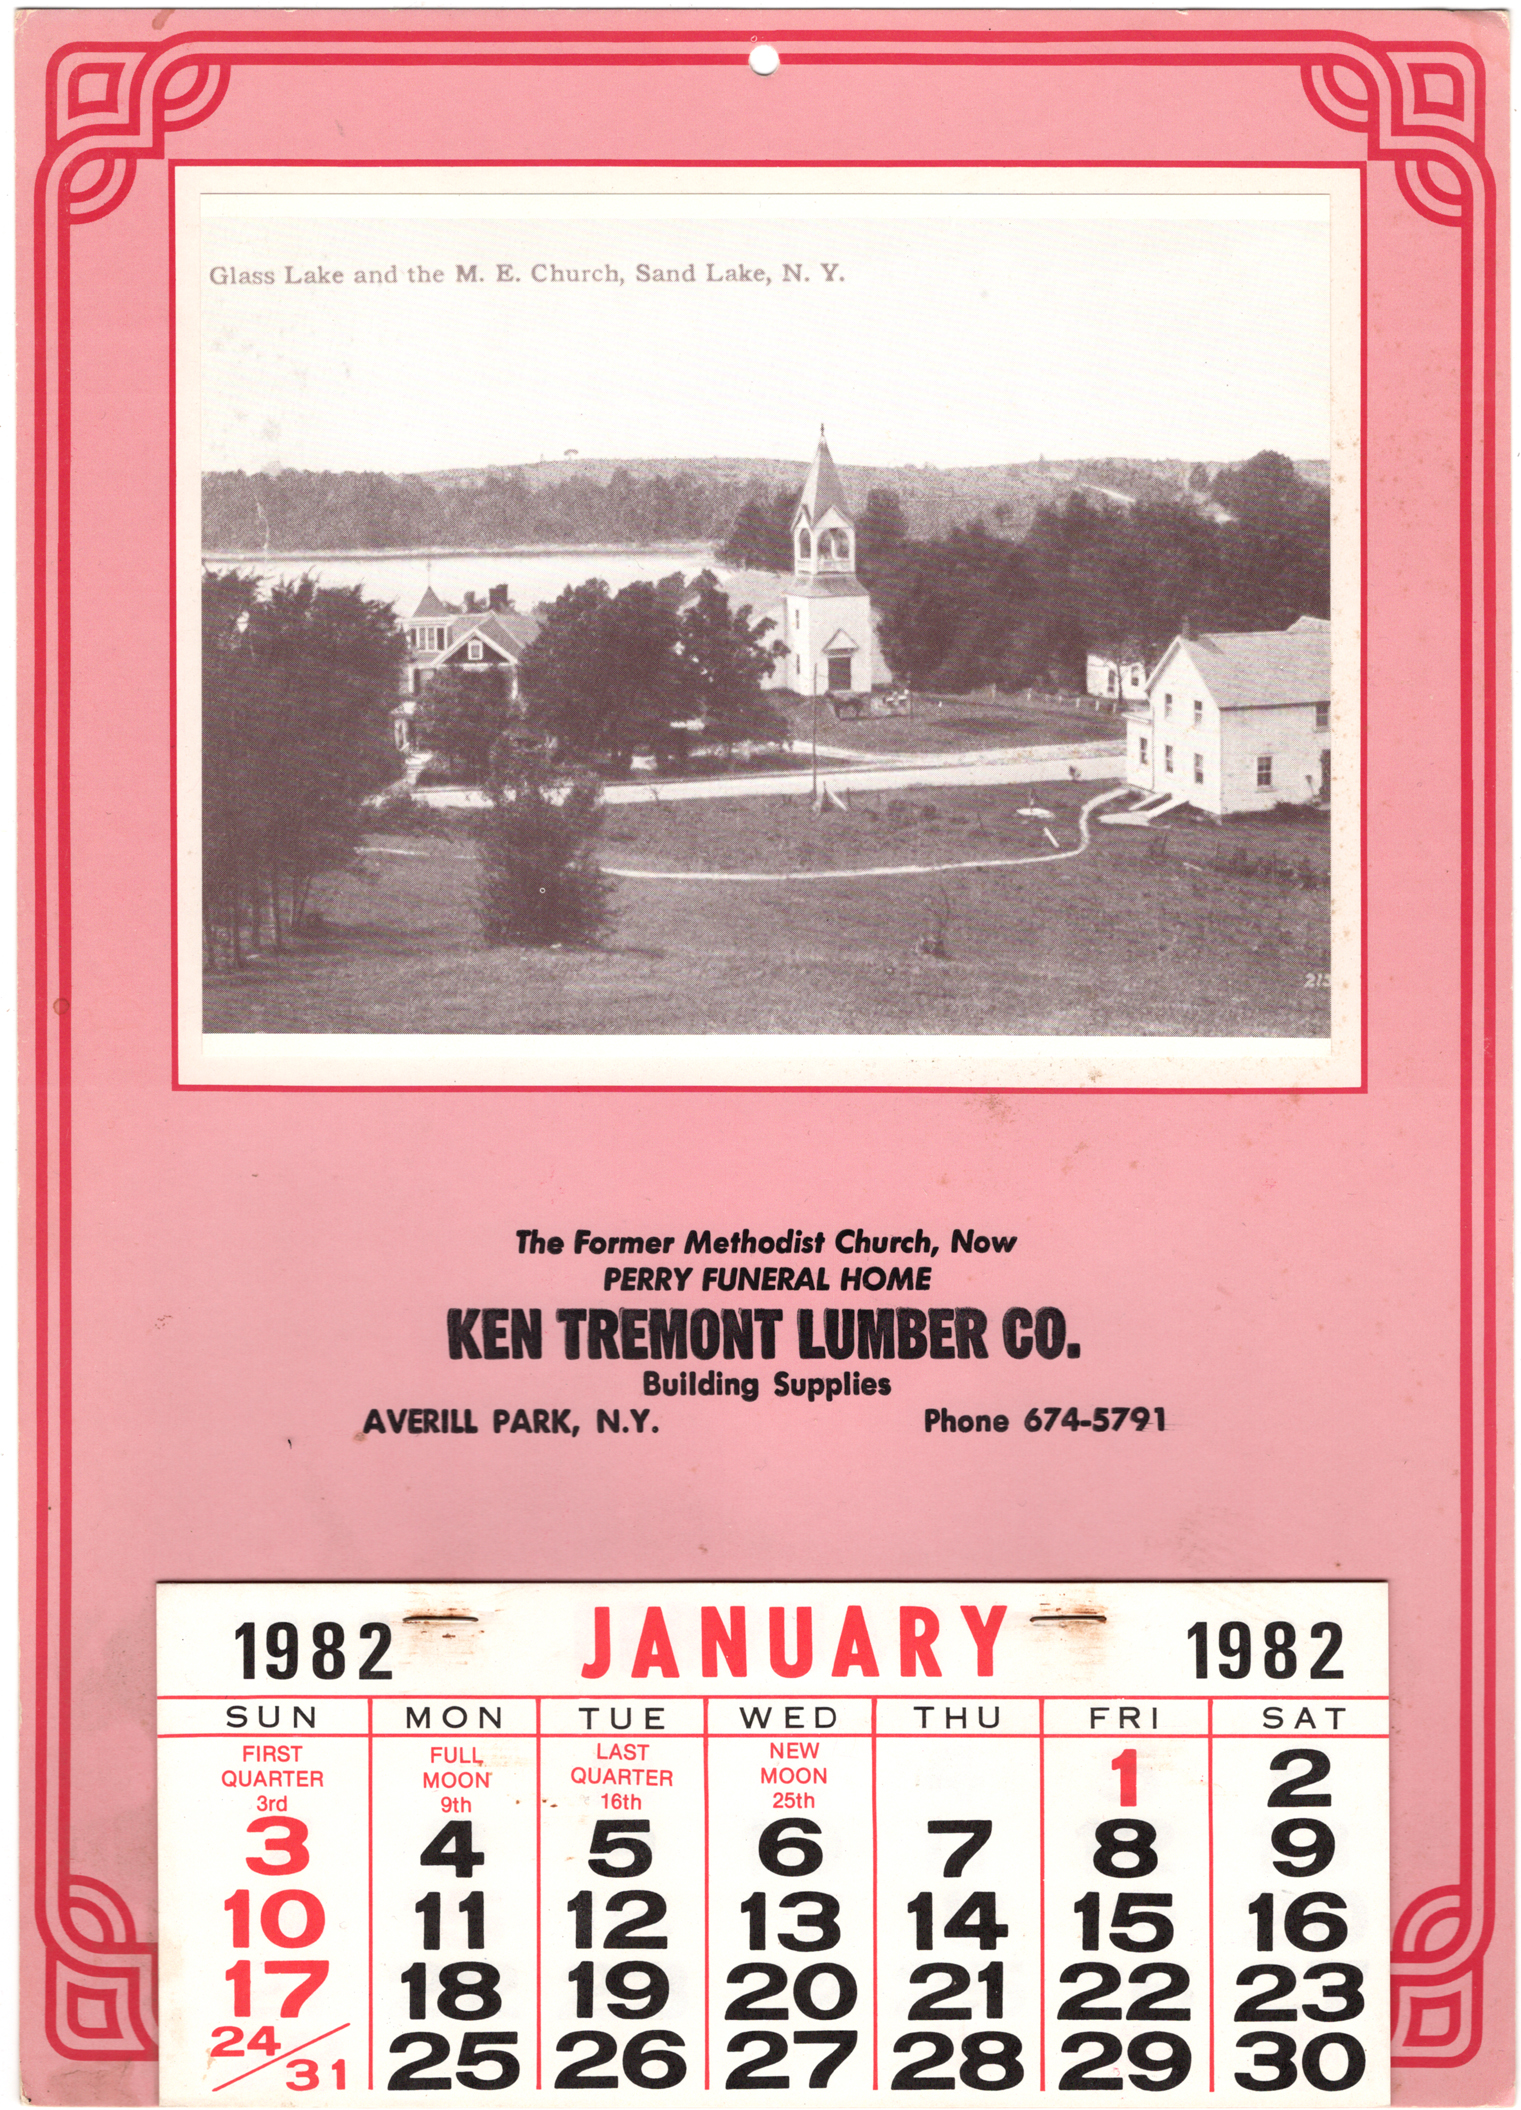 Tremont Lumber Company calendar from 1982.